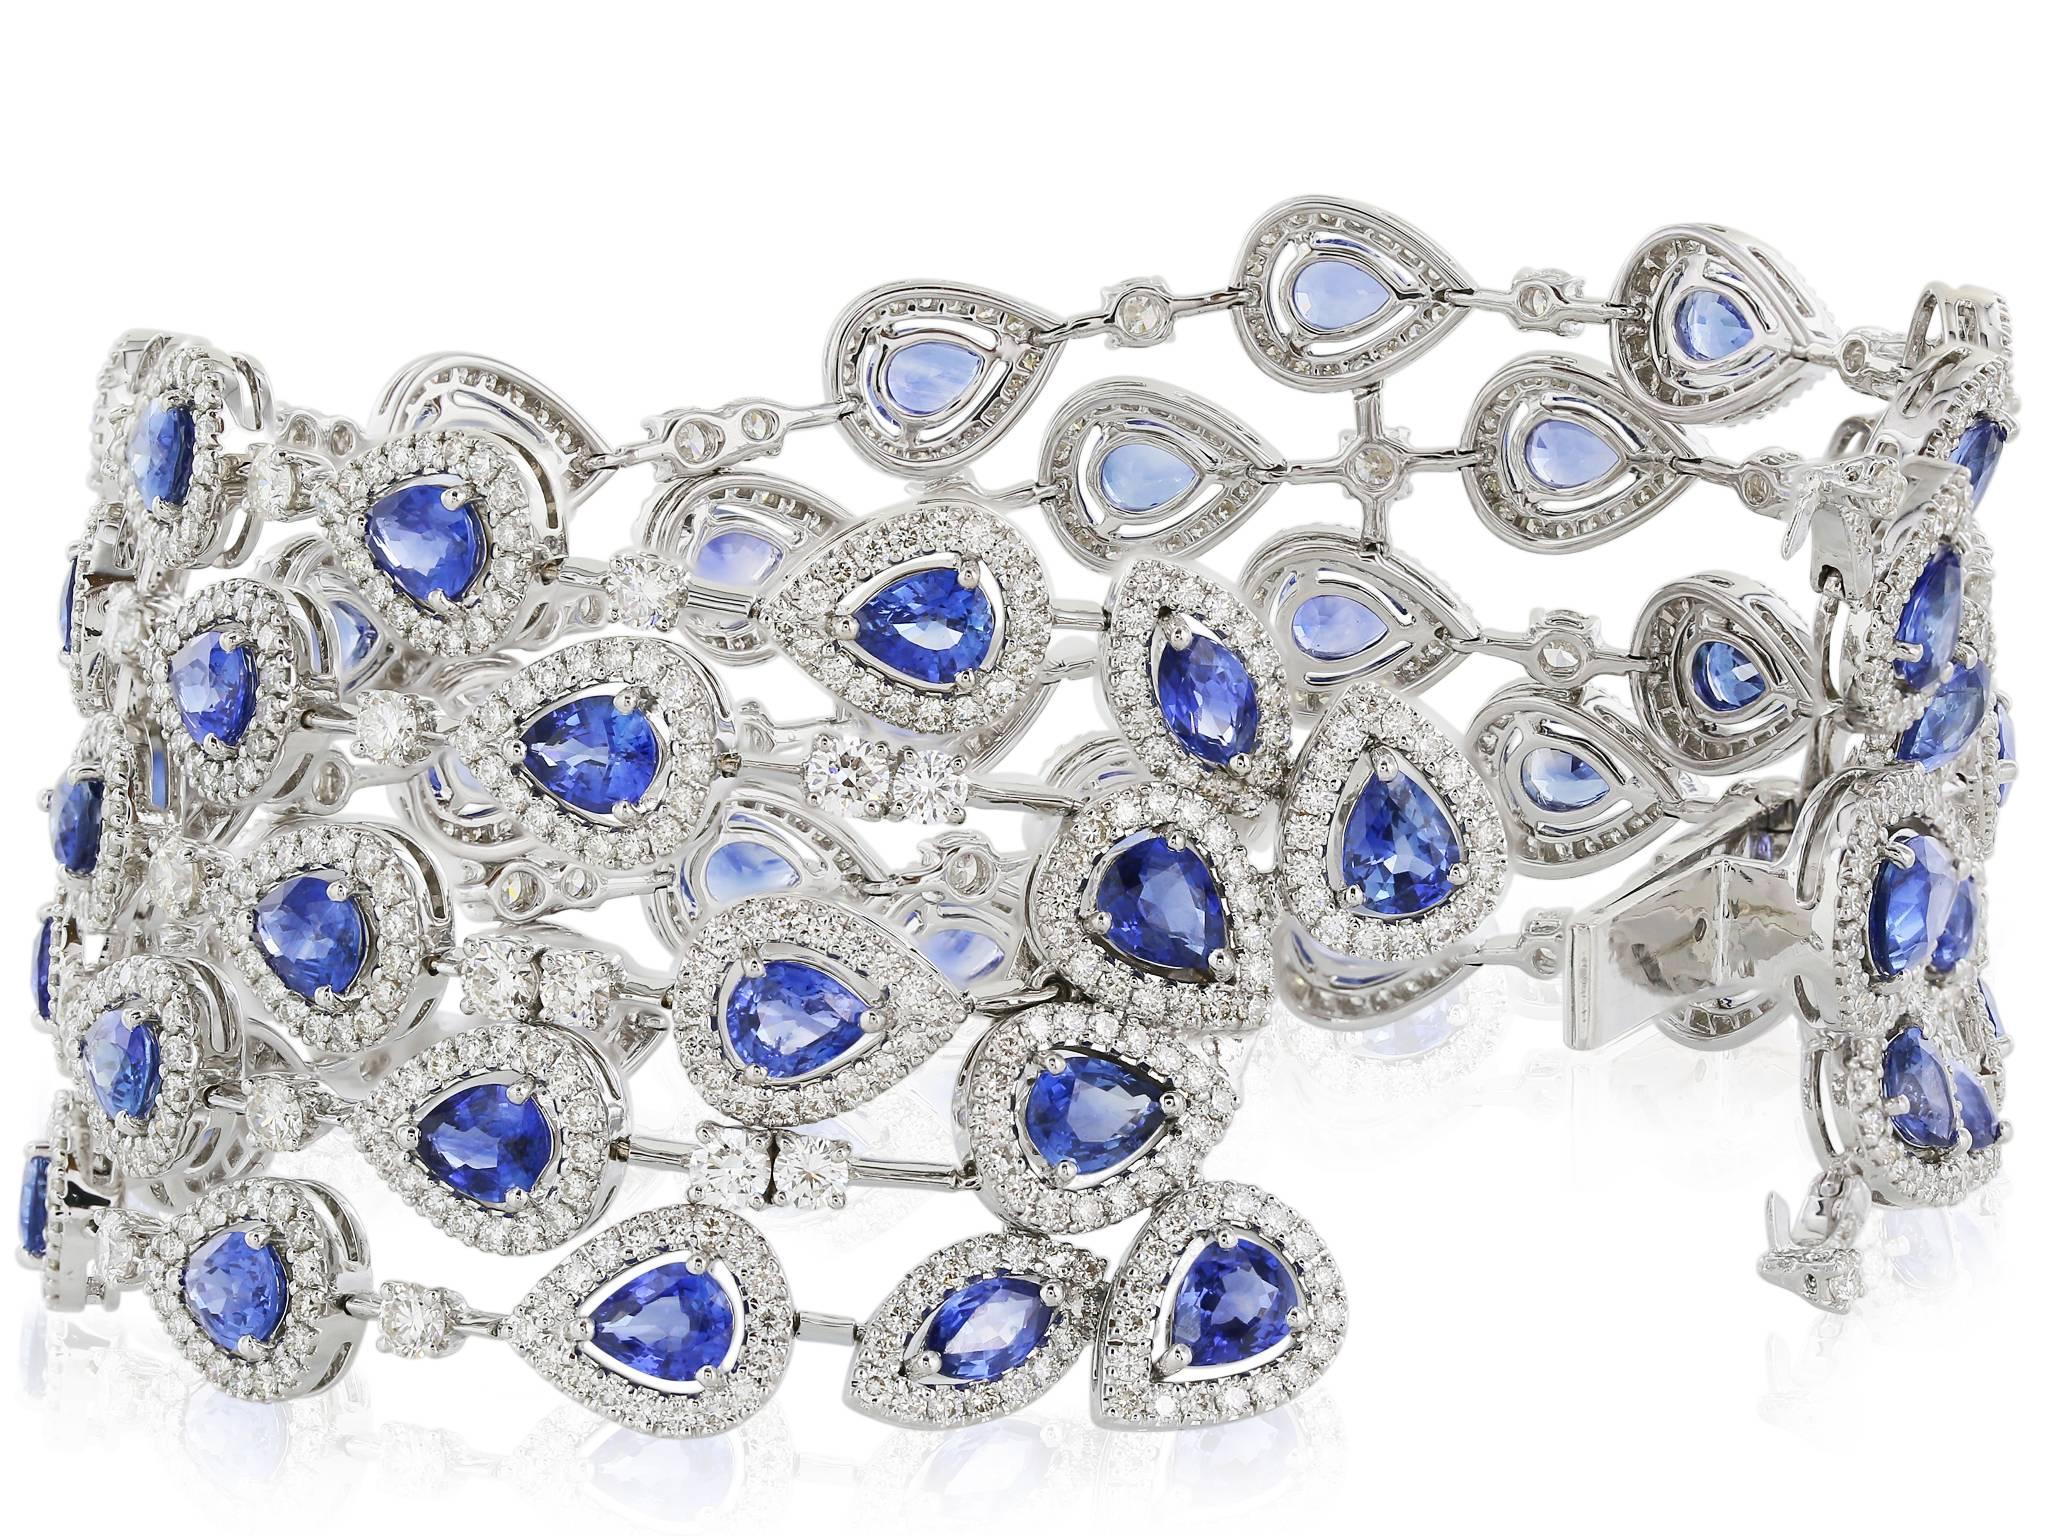 19.48 Carat Sapphire 10.77 Carat Diamond Gold Bracelet In Excellent Condition For Sale In Chestnut Hill, MA